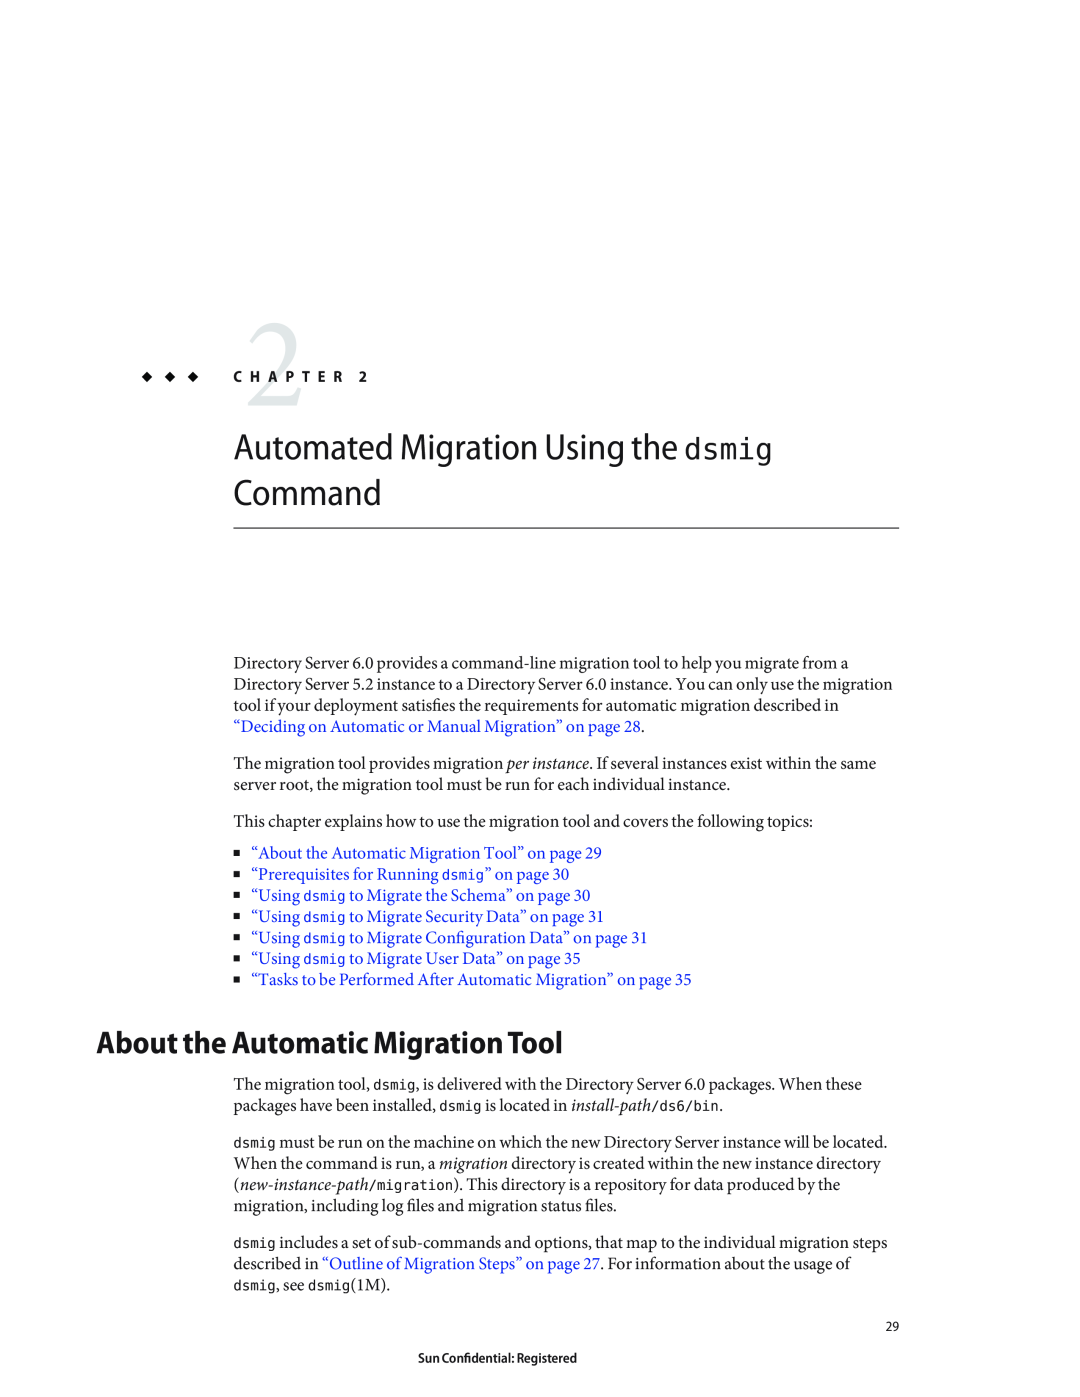 Sun Microsystems 8190994 manual Automated Migration Using the dsmig Command, About the Automatic Migration Tool 